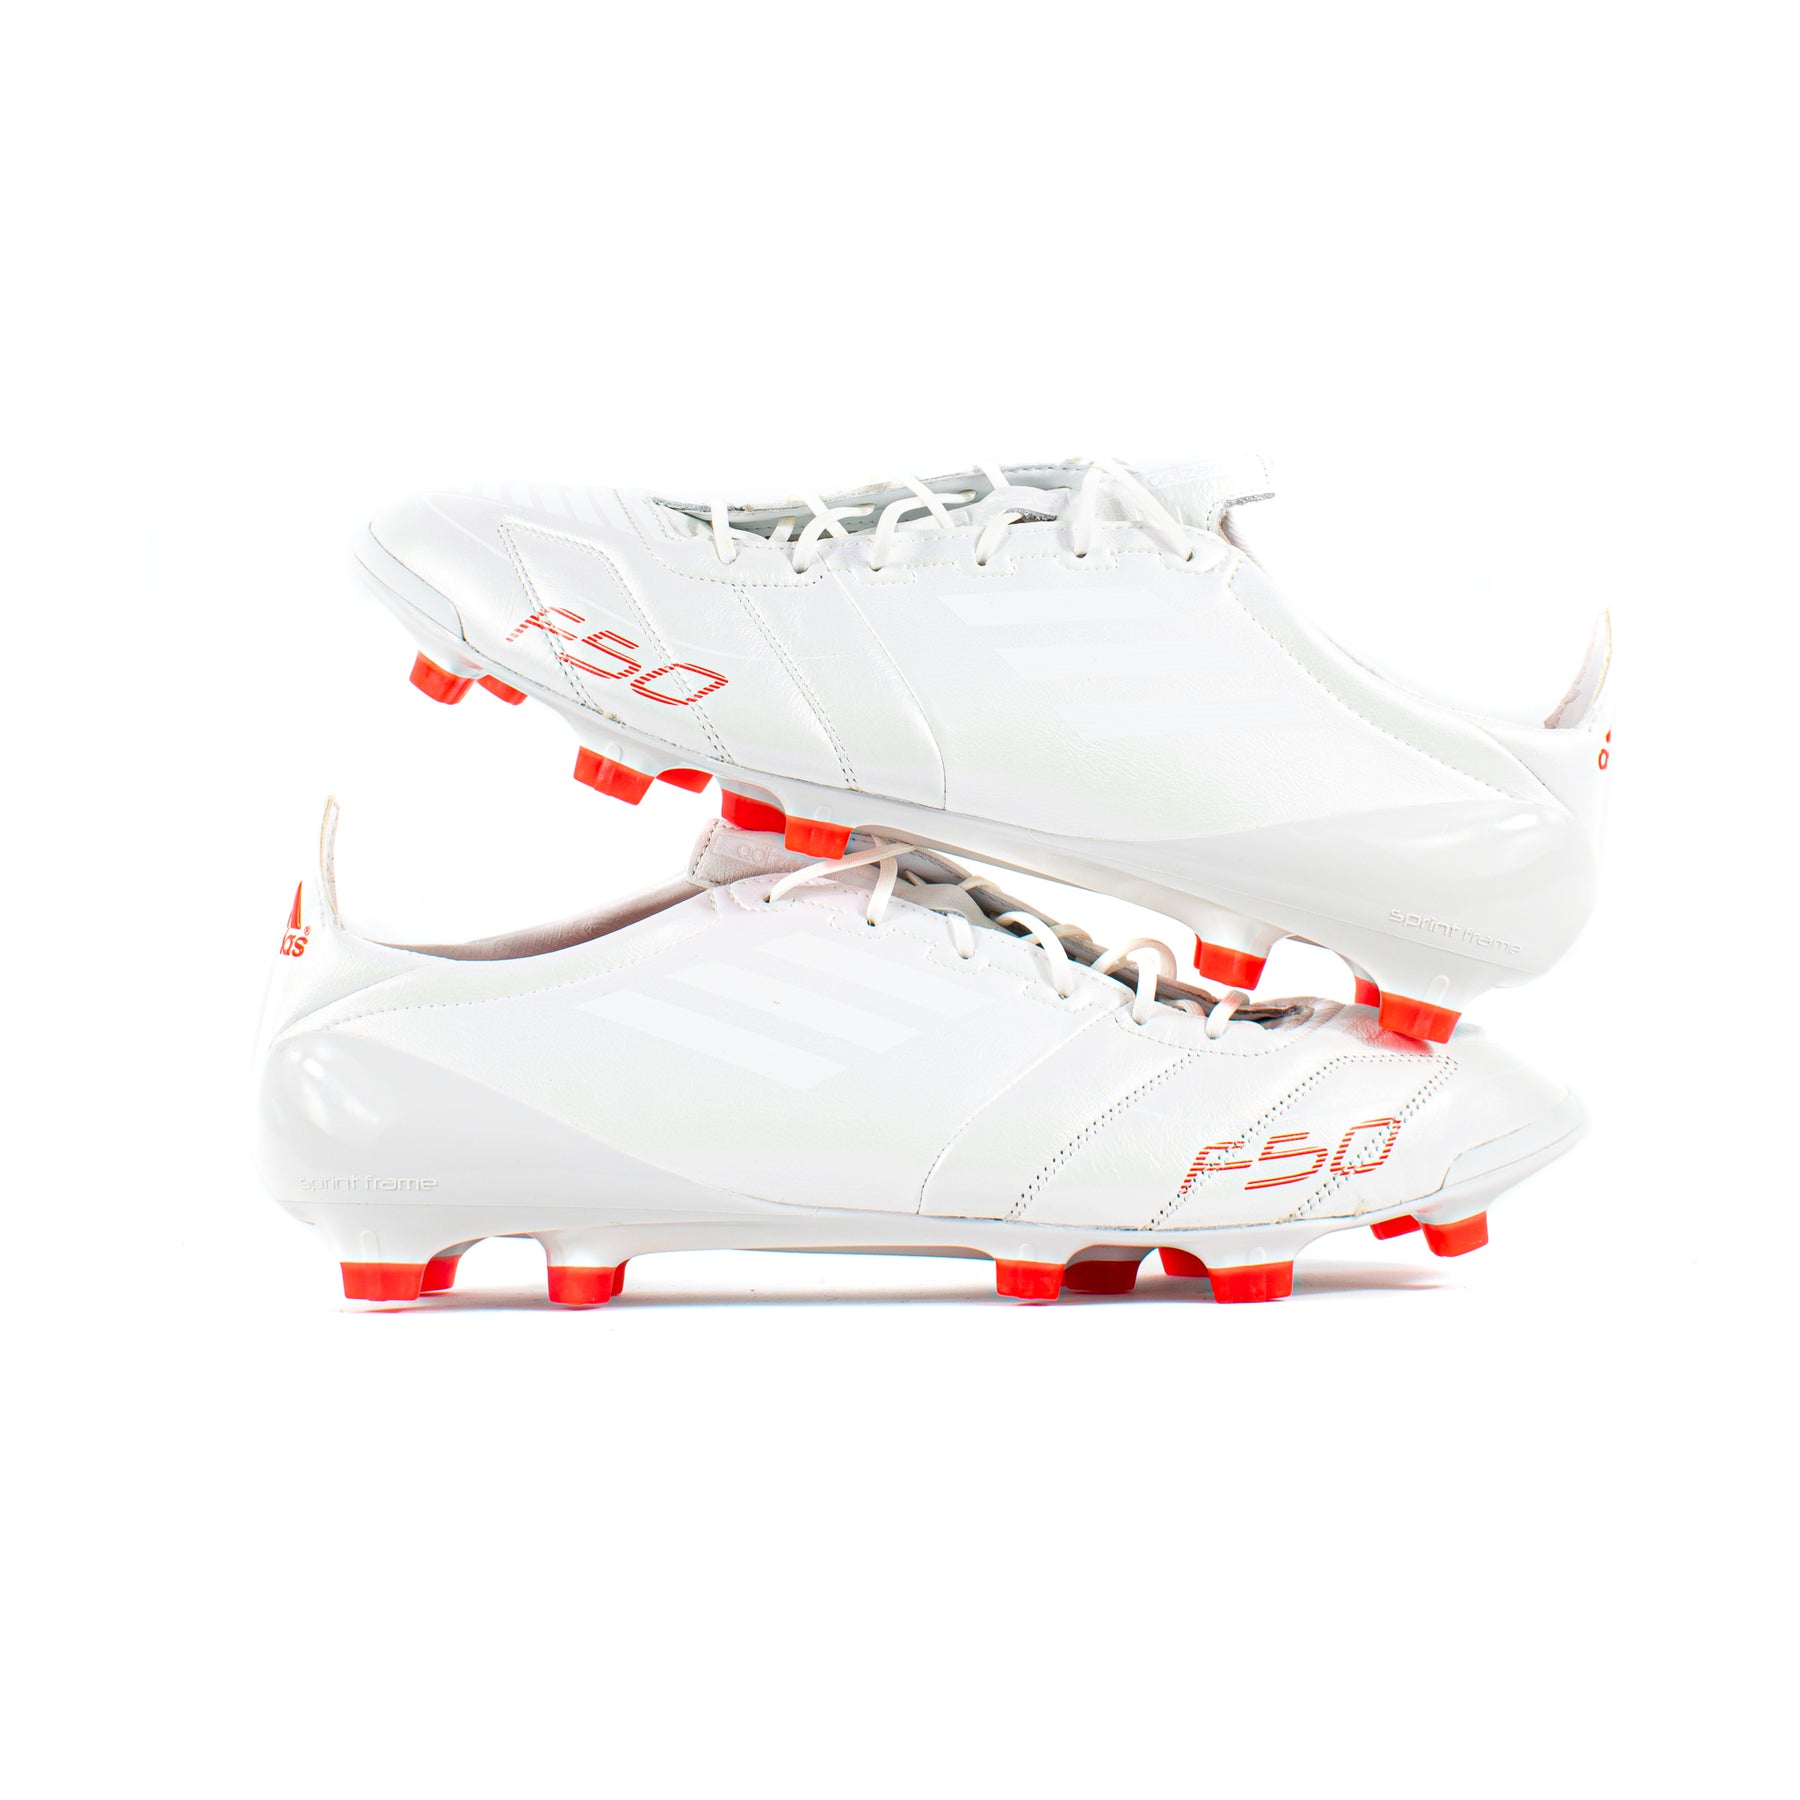 Adidas F50 Adizero Leather Whiteout FG Classic Soccer Cleats